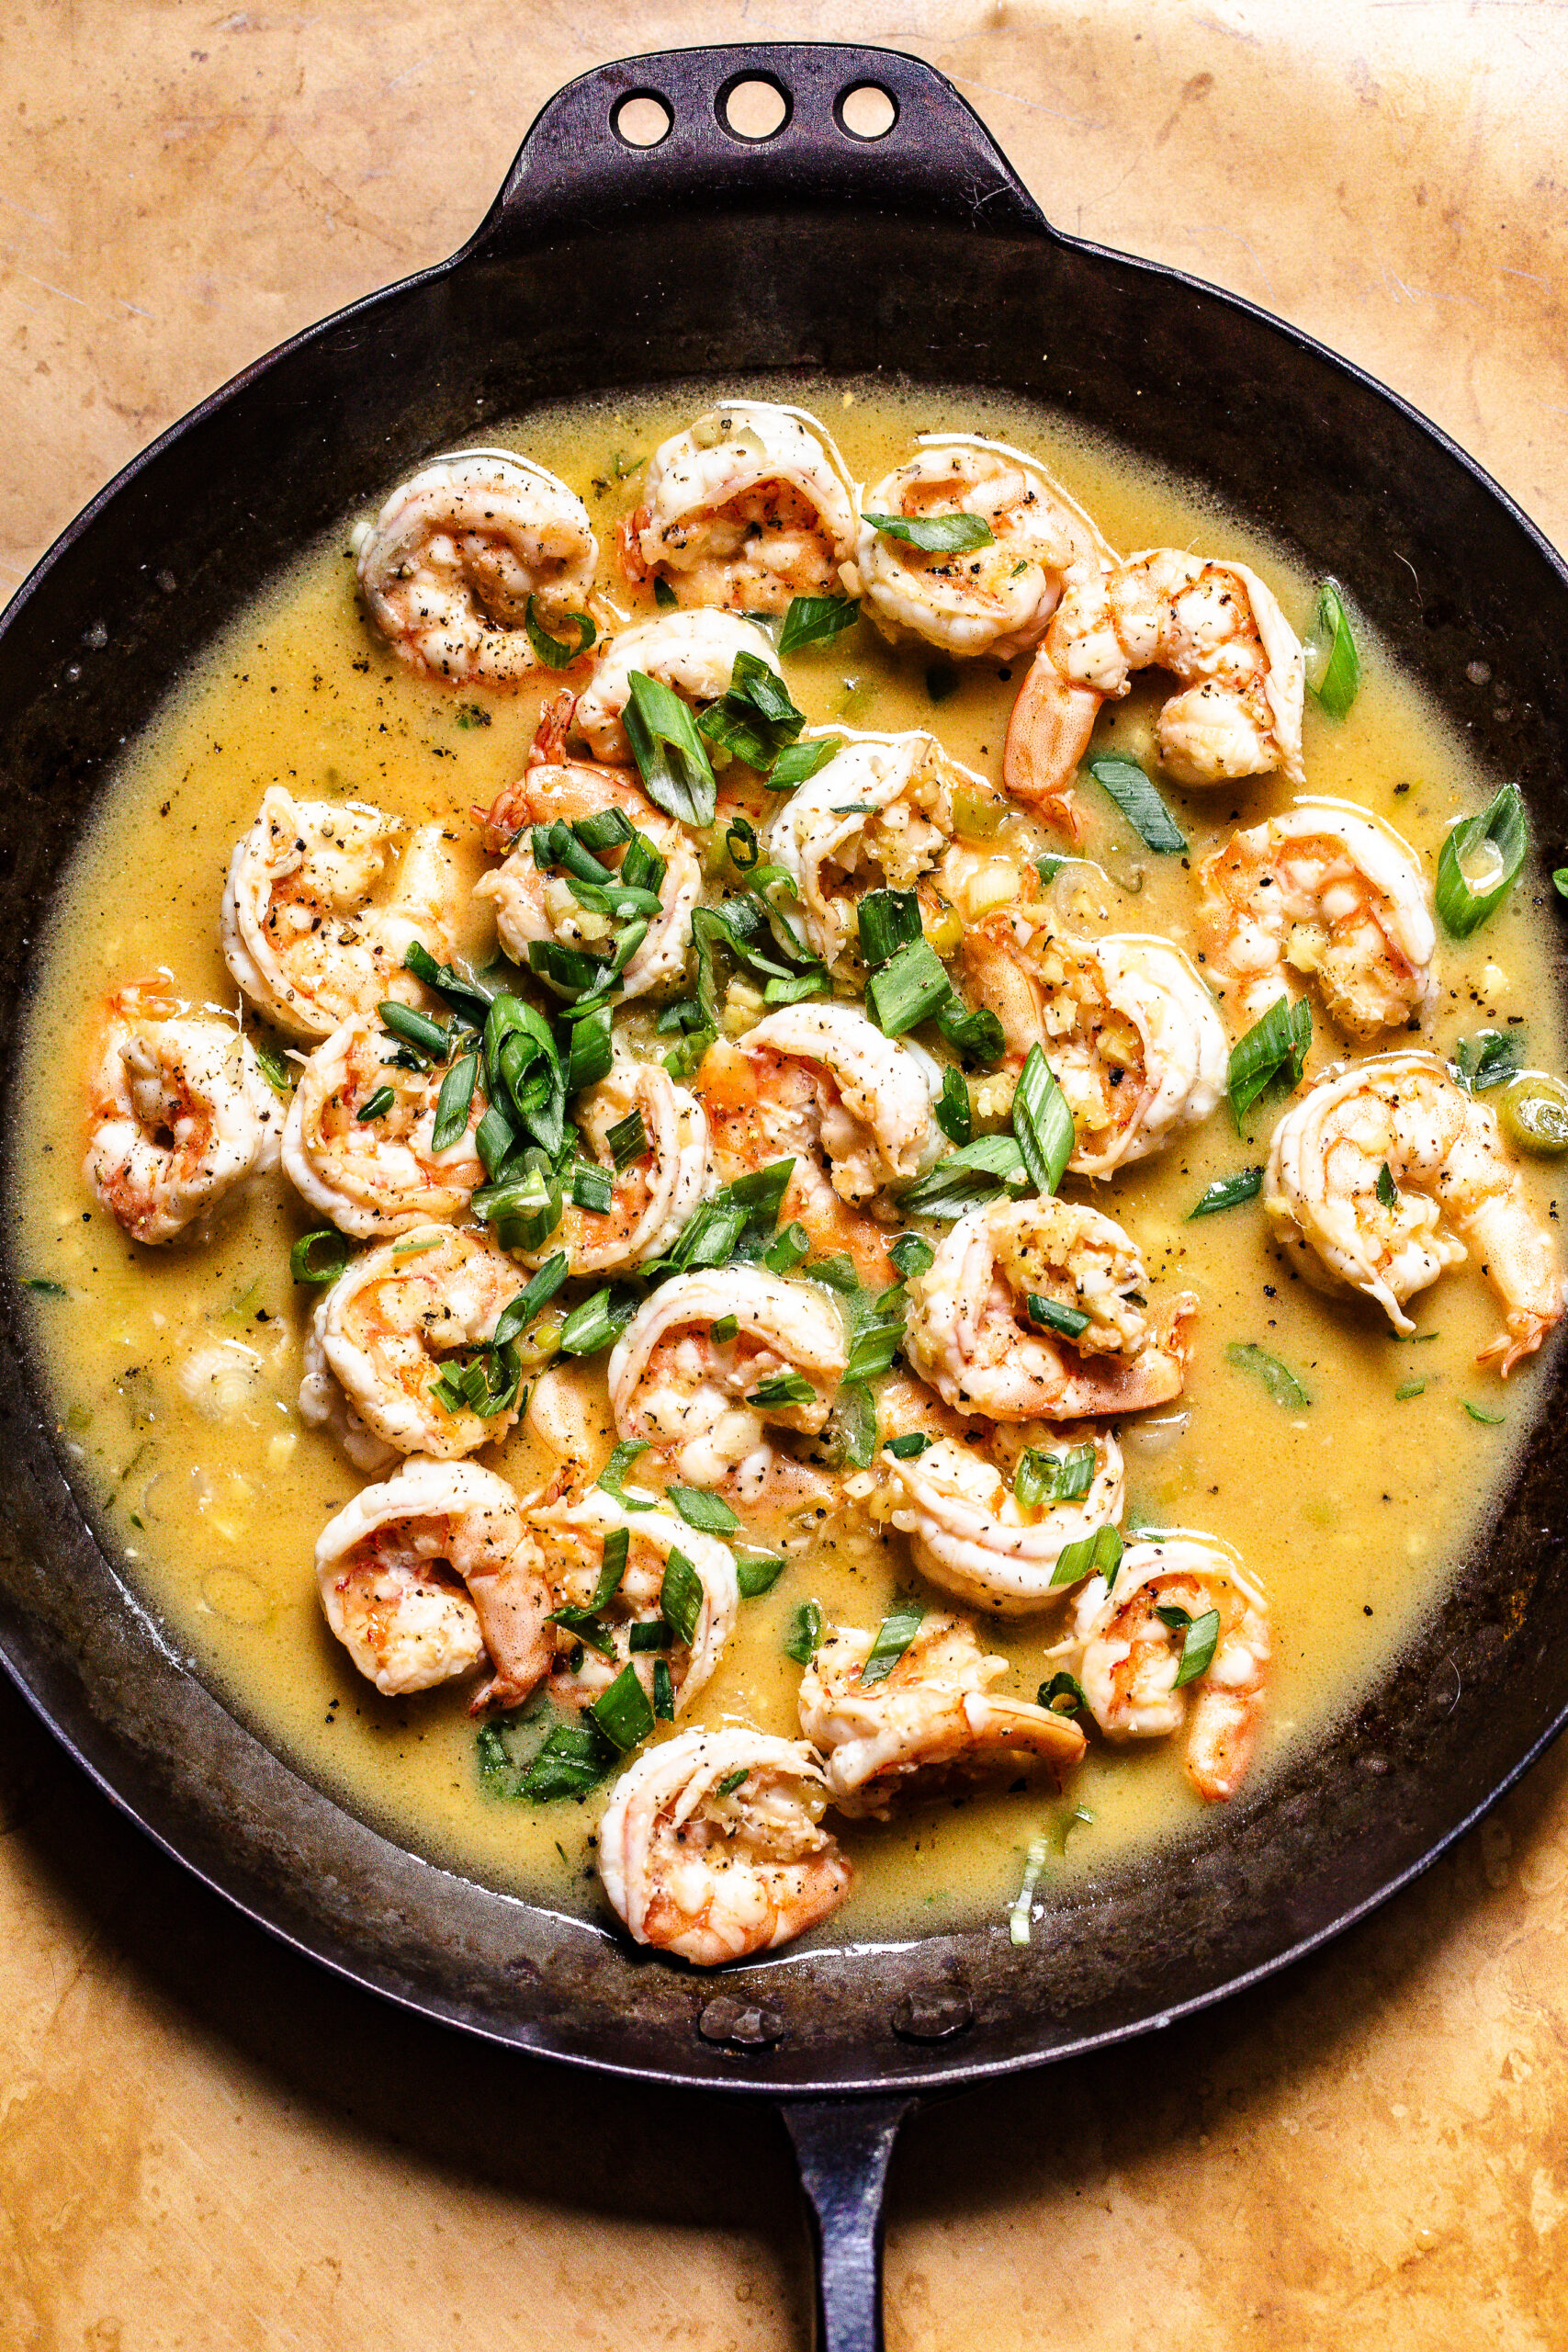 Favorite Buttery Citrus Shrimp with Garlic and Ginger (gluten free)